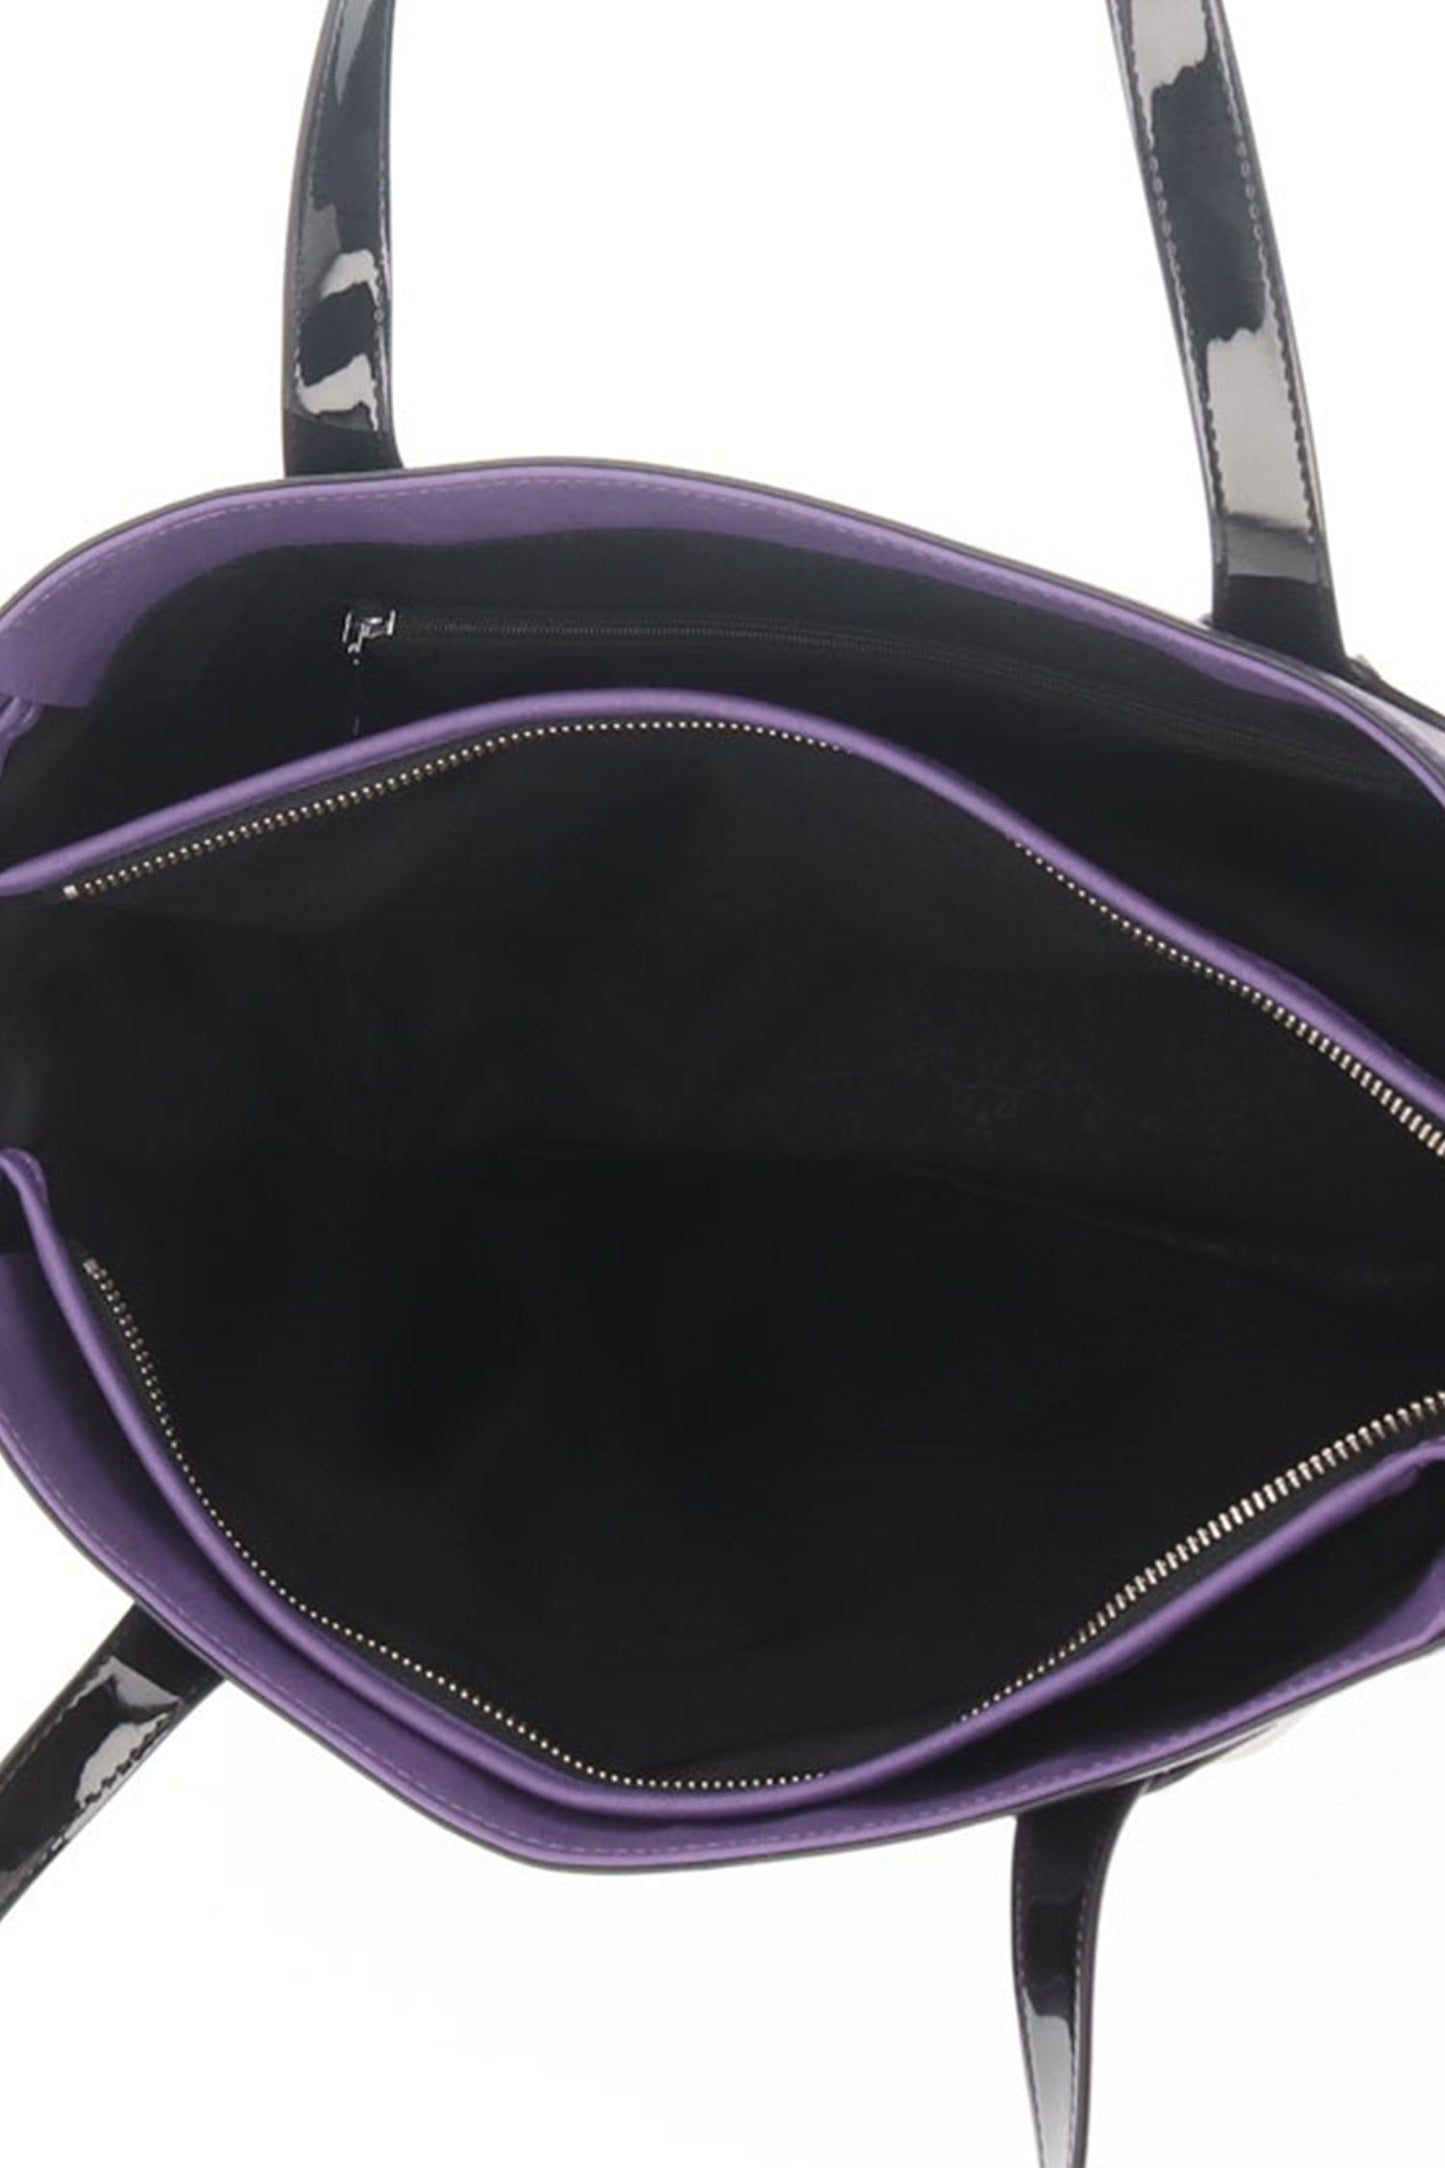 Metallica Large Tote Bag Purple open has with plenty of space to carry a lot of your belonging